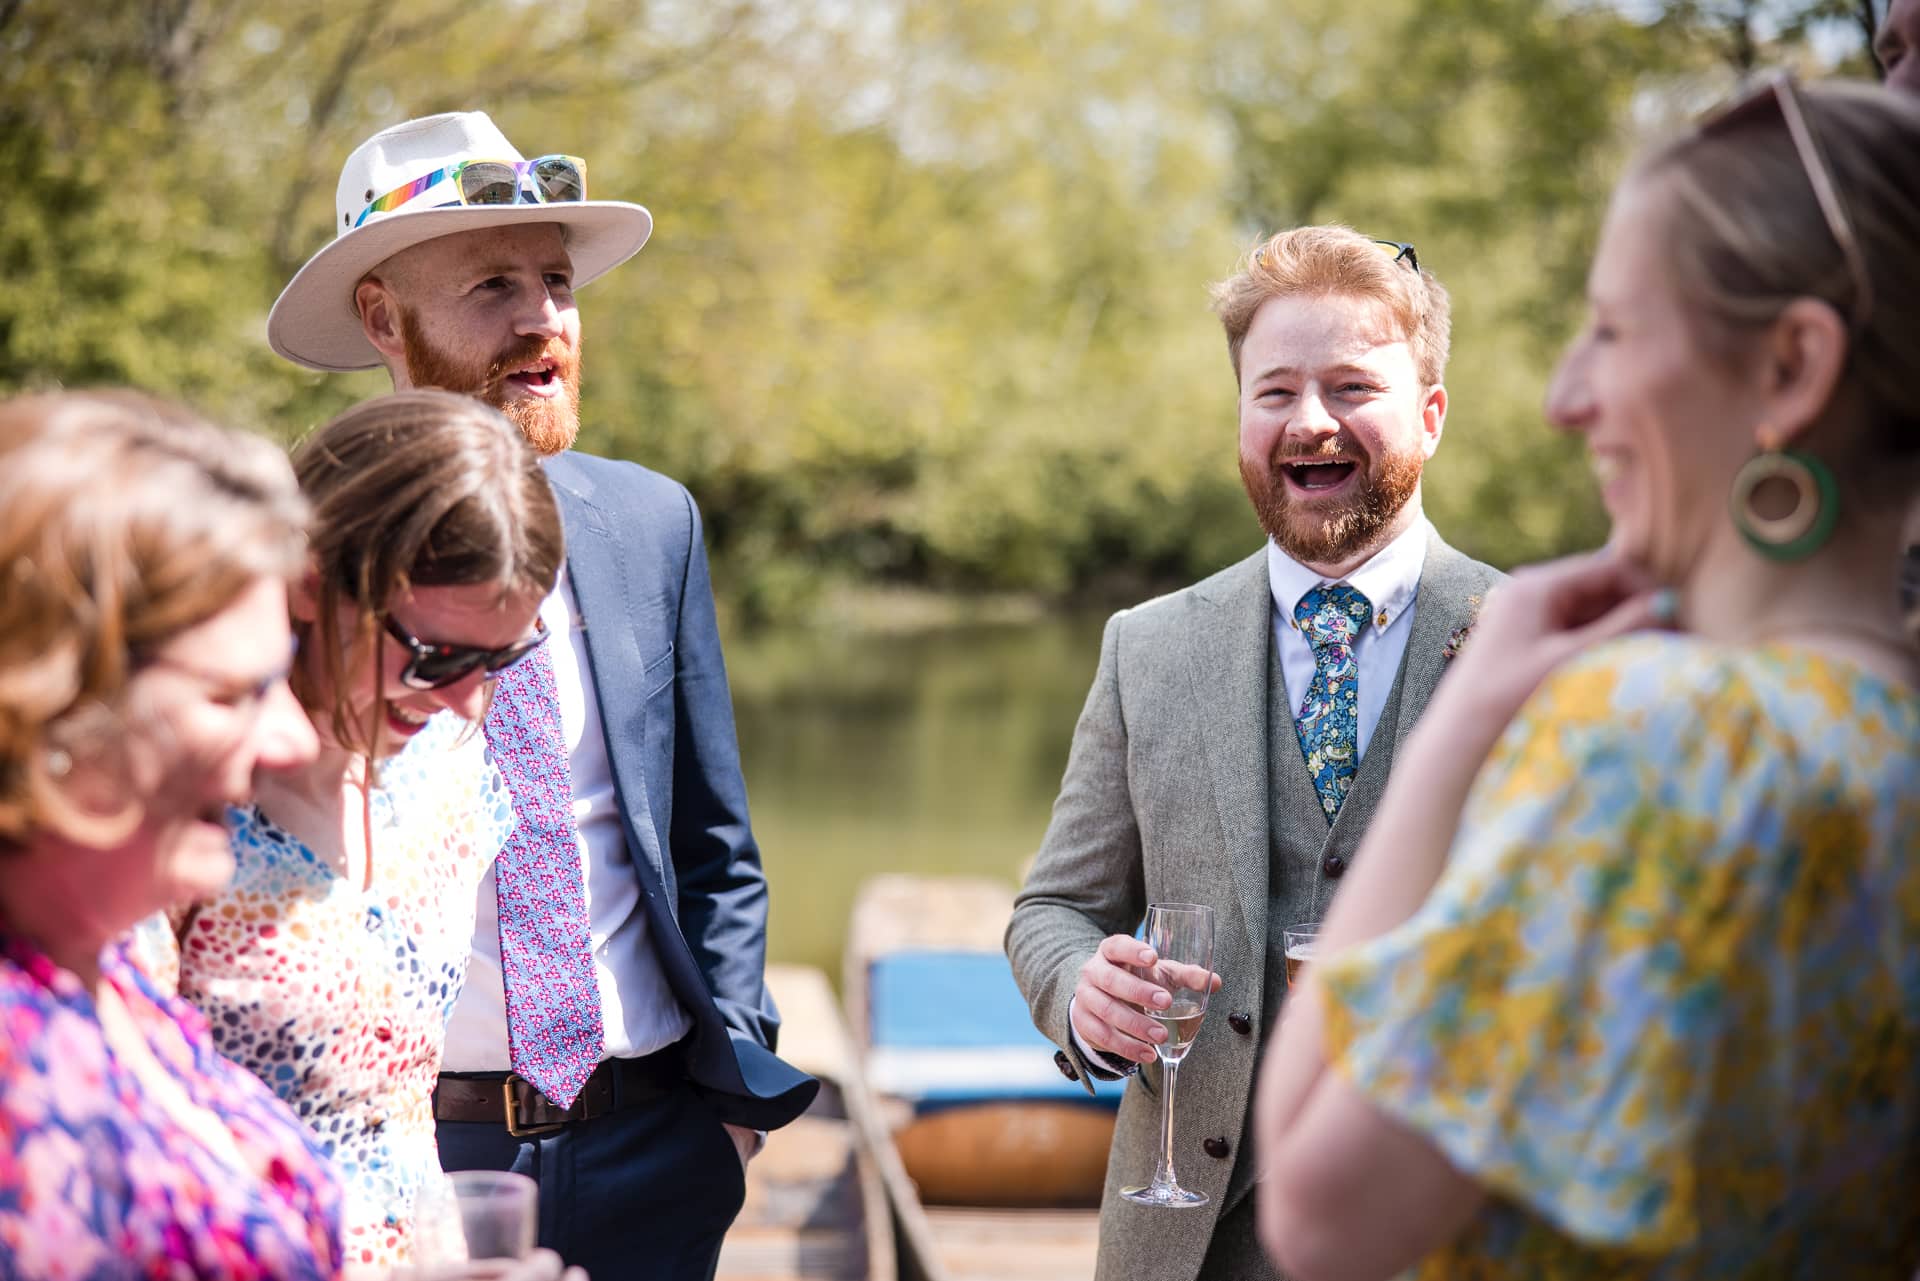 Groom and Guests in conversation at the Cherwell Boathouse